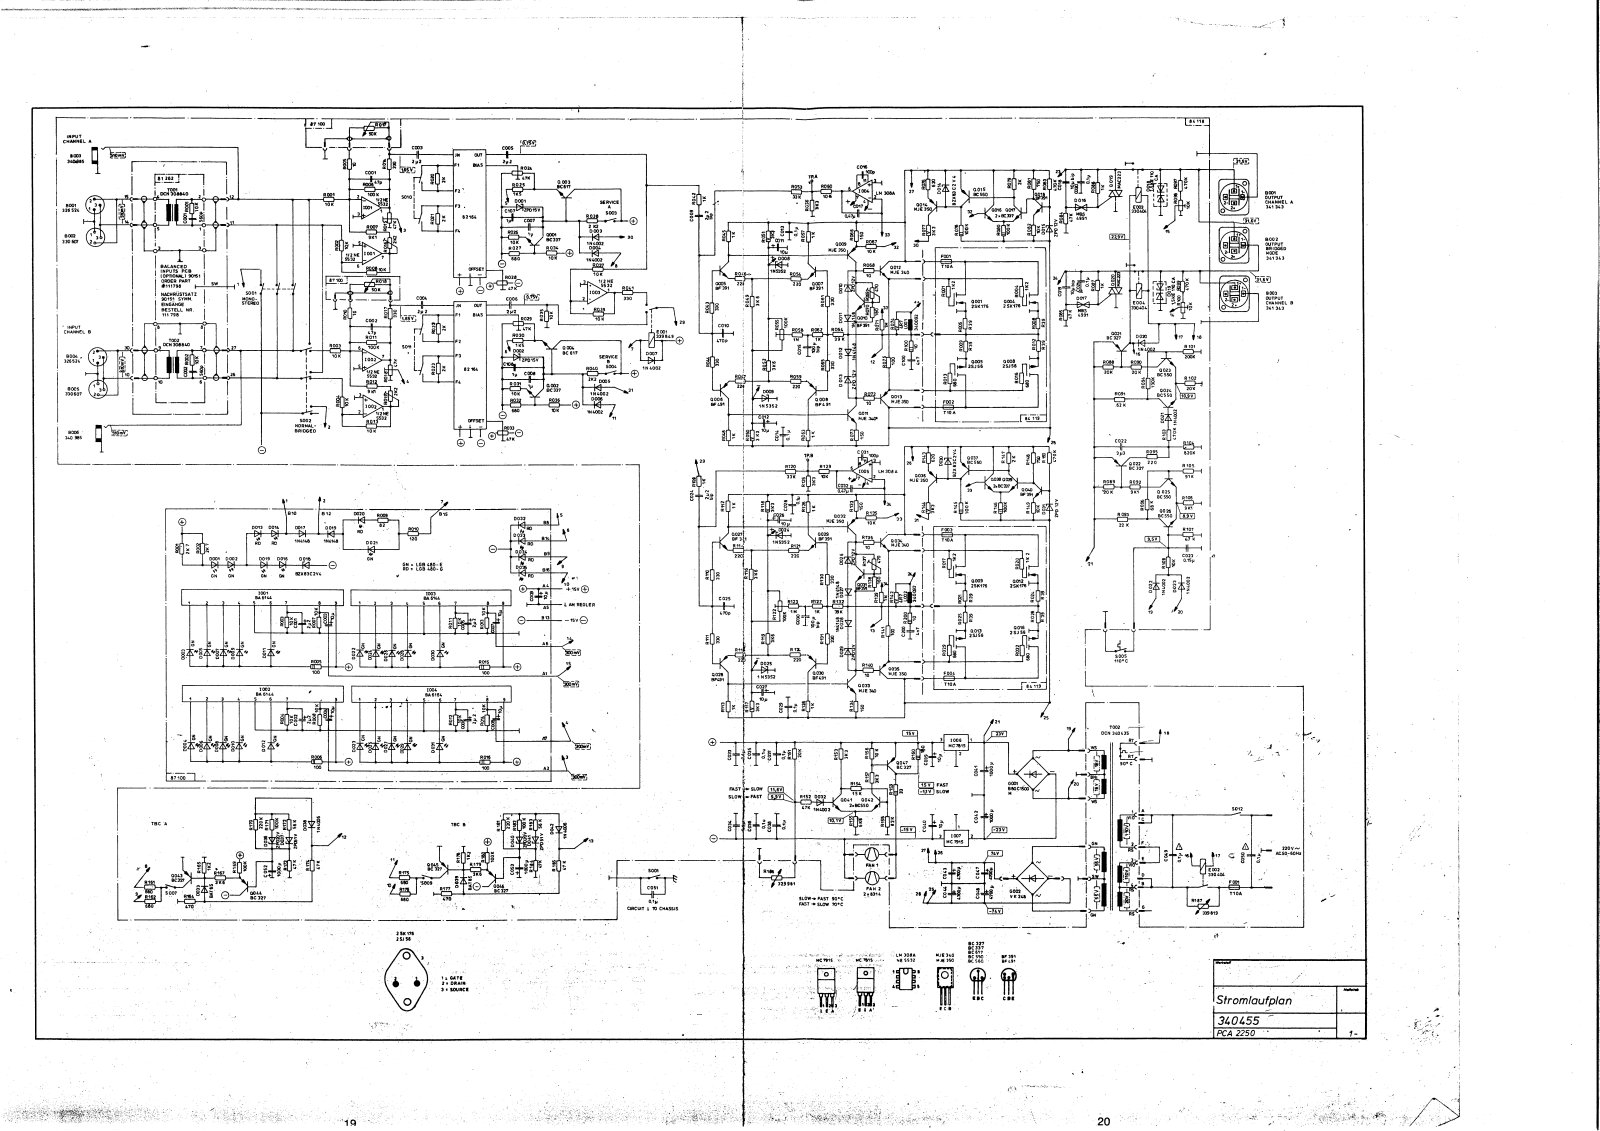 Dynacord PCA-2450 Schematic